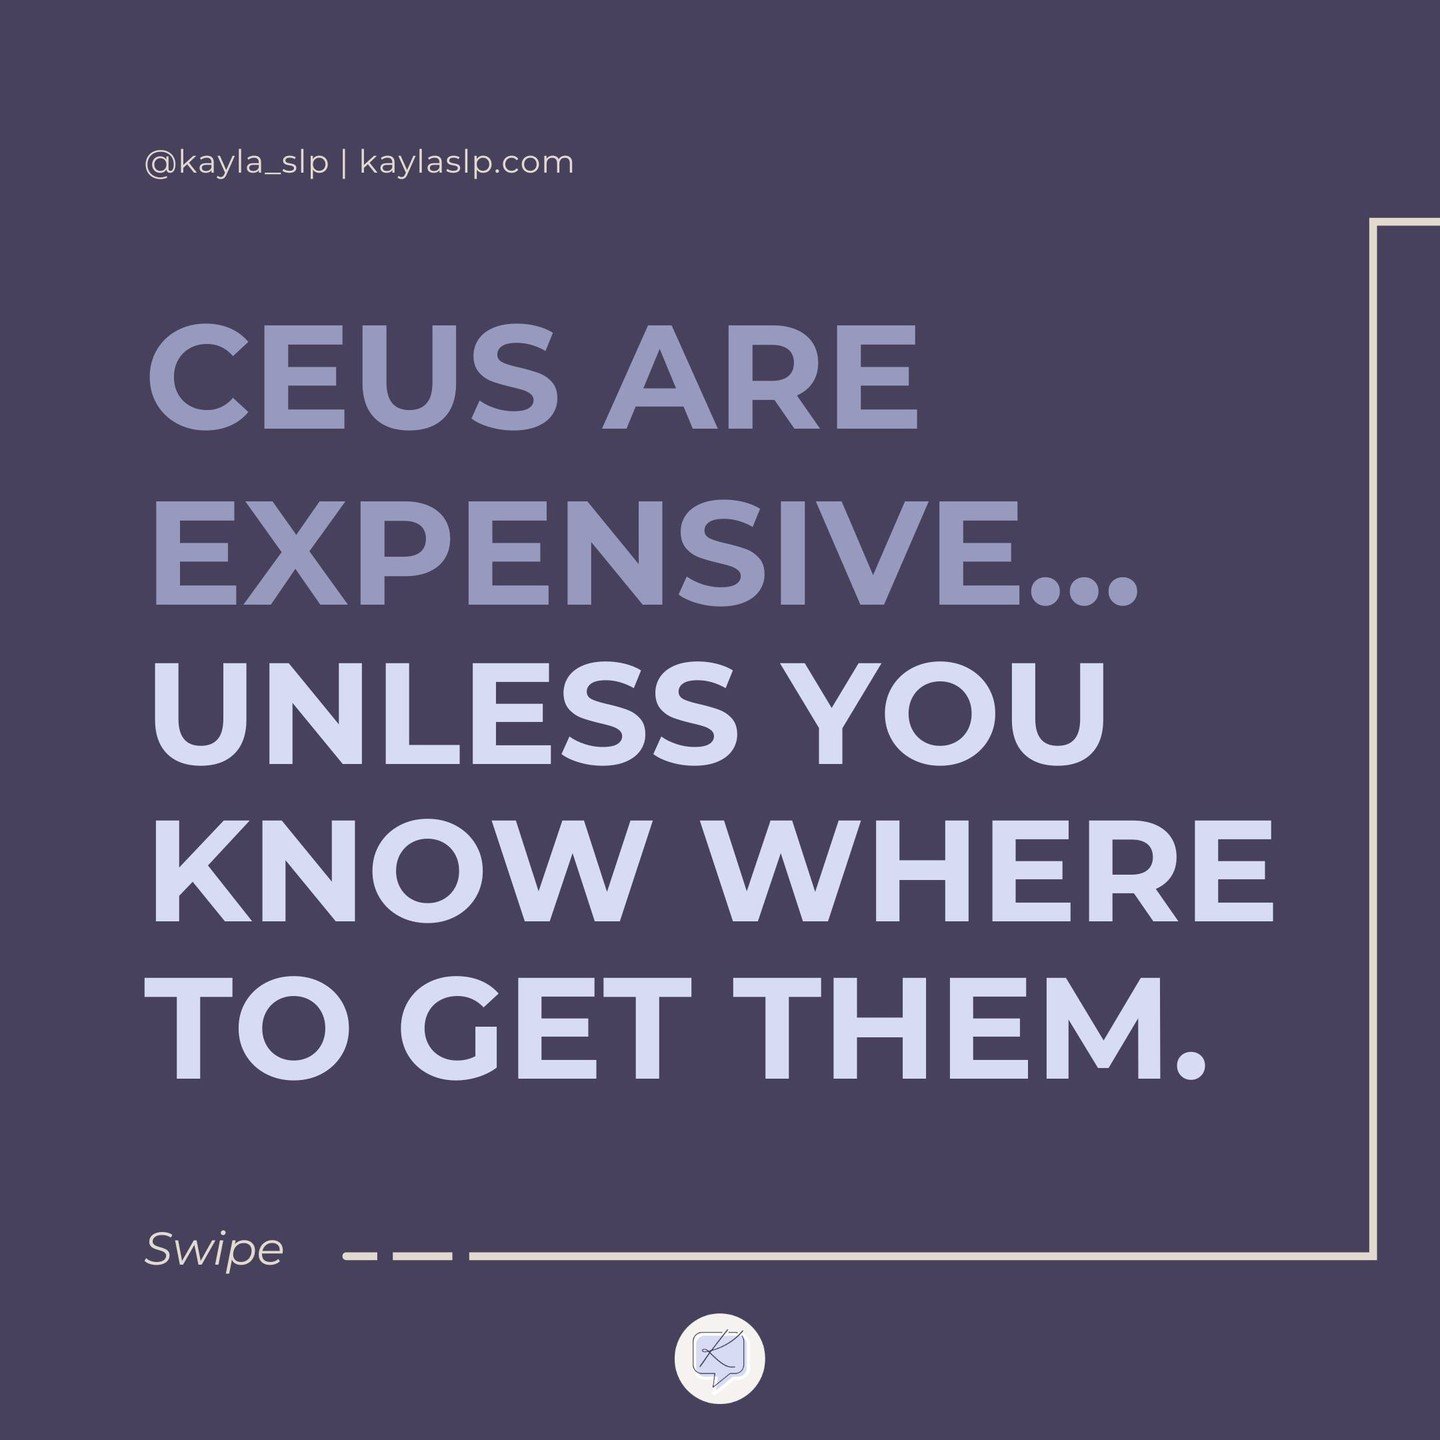 So, here's my take on CEUs. The cost of these continuing education units can be seriously outrageous. It's a real bummer when you shell out a ton of money for these courses and they turn out to be a letdown. I'm sure we've all been there. We sign up 